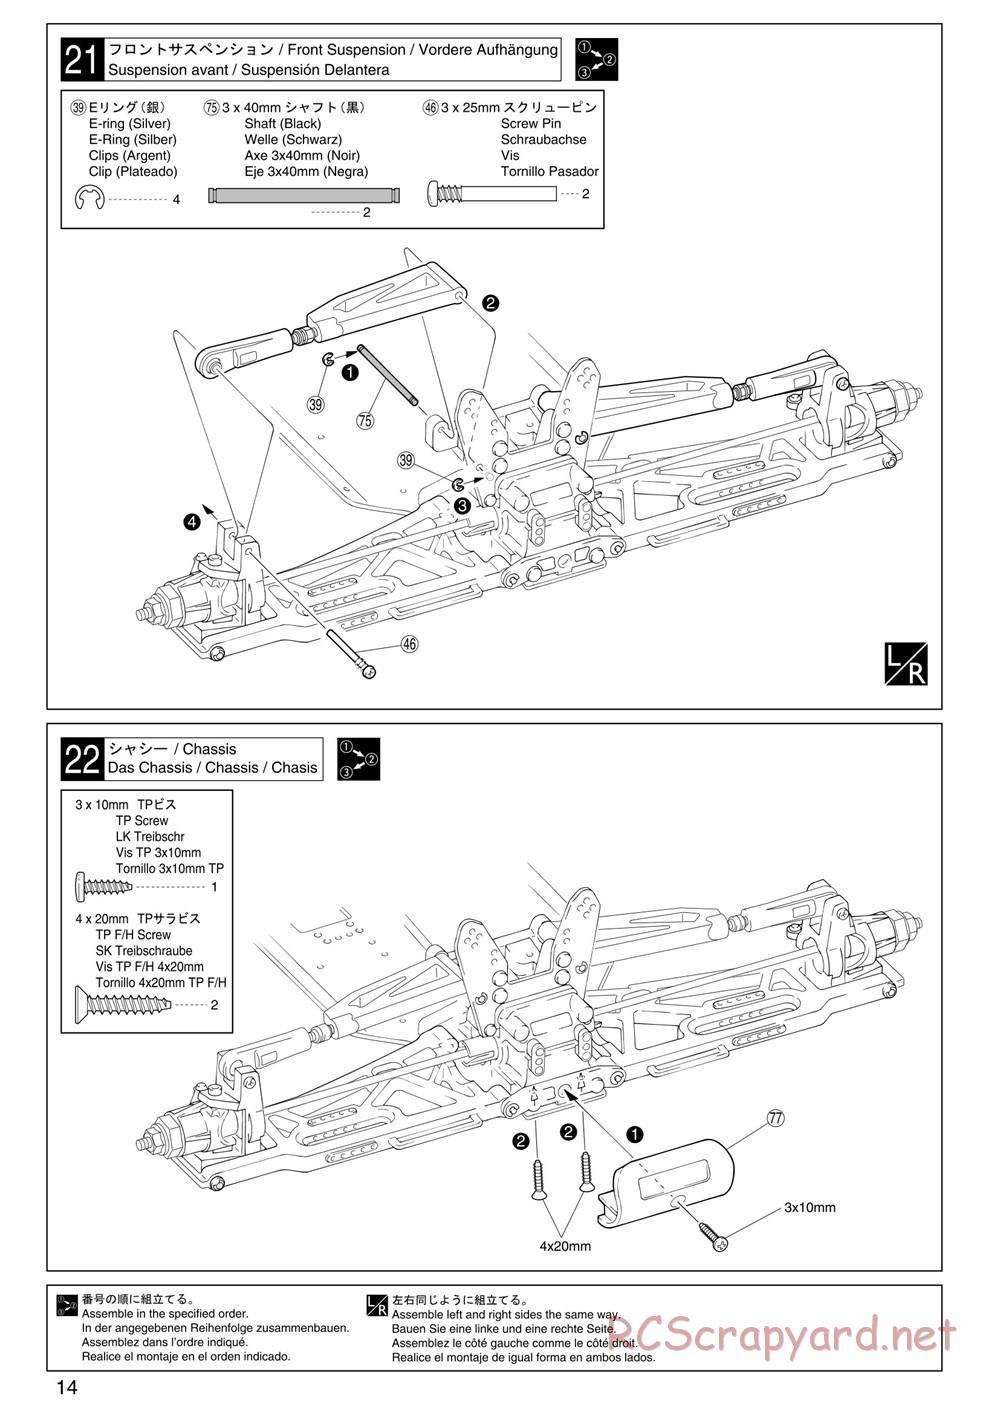 Kyosho - Inferno ST (2005) - Manual - Page 14